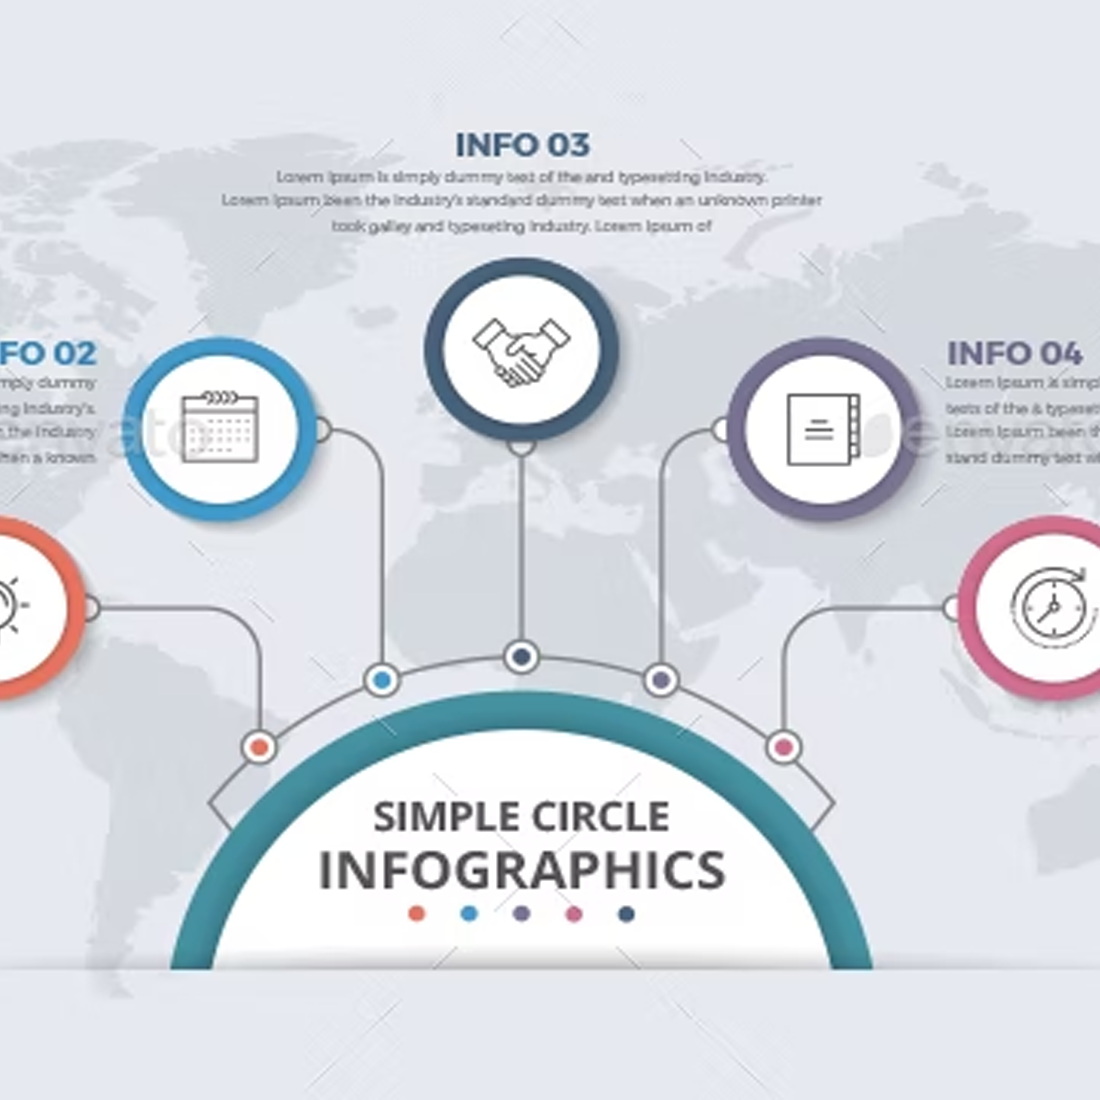 Images preview simple circle infographics.